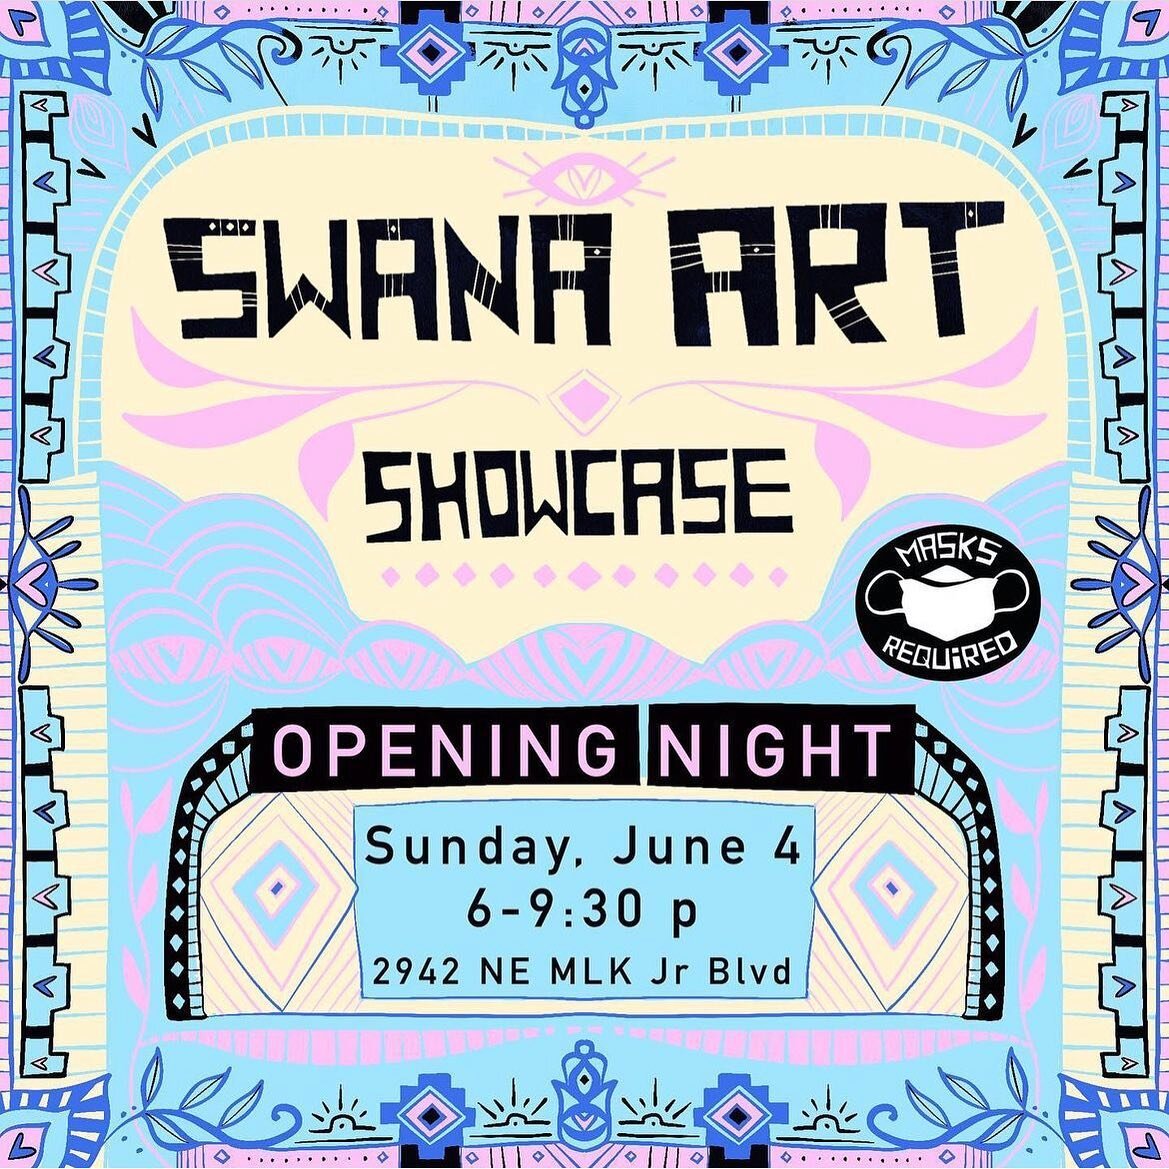 So grateful and excited to have a textile piece in this show with such an amazing group of SWANA artists.

Press release below written by @ankh.inkh.studios studios:

&ldquo;The Center for Study and Preservation of Palestine and SWANA Artists PDX are